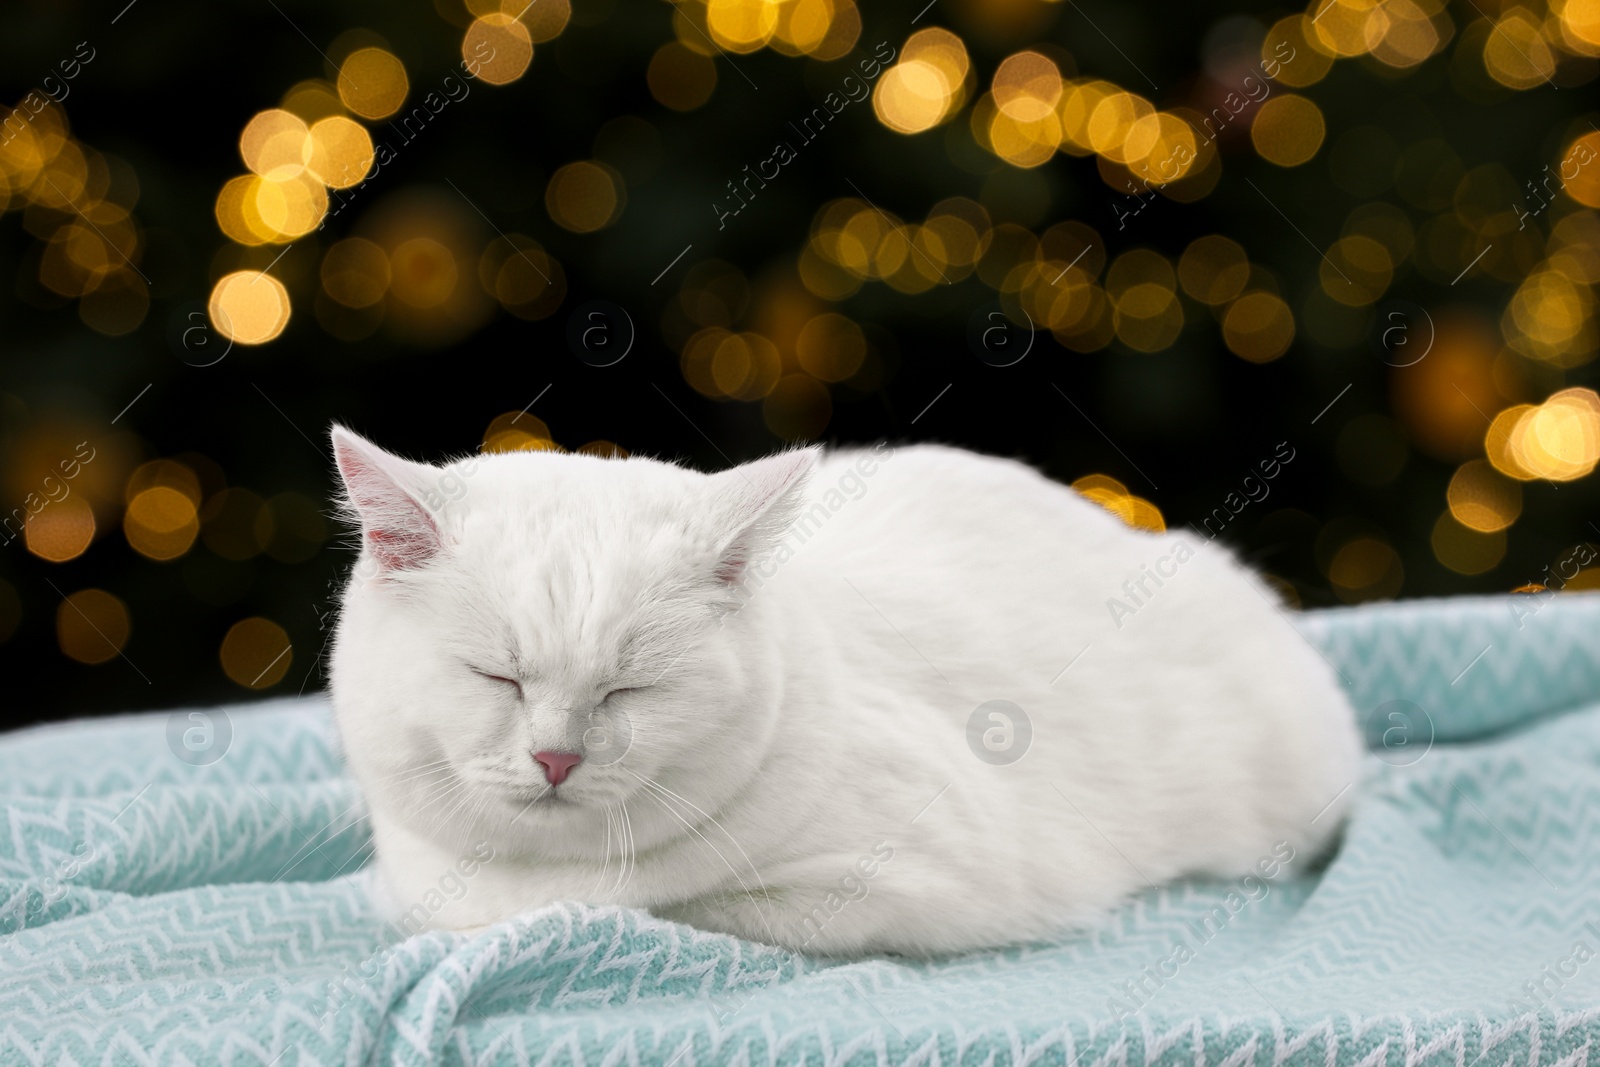 Photo of Christmas atmosphere. Cute cat lying on light blue blanket against blurred lights